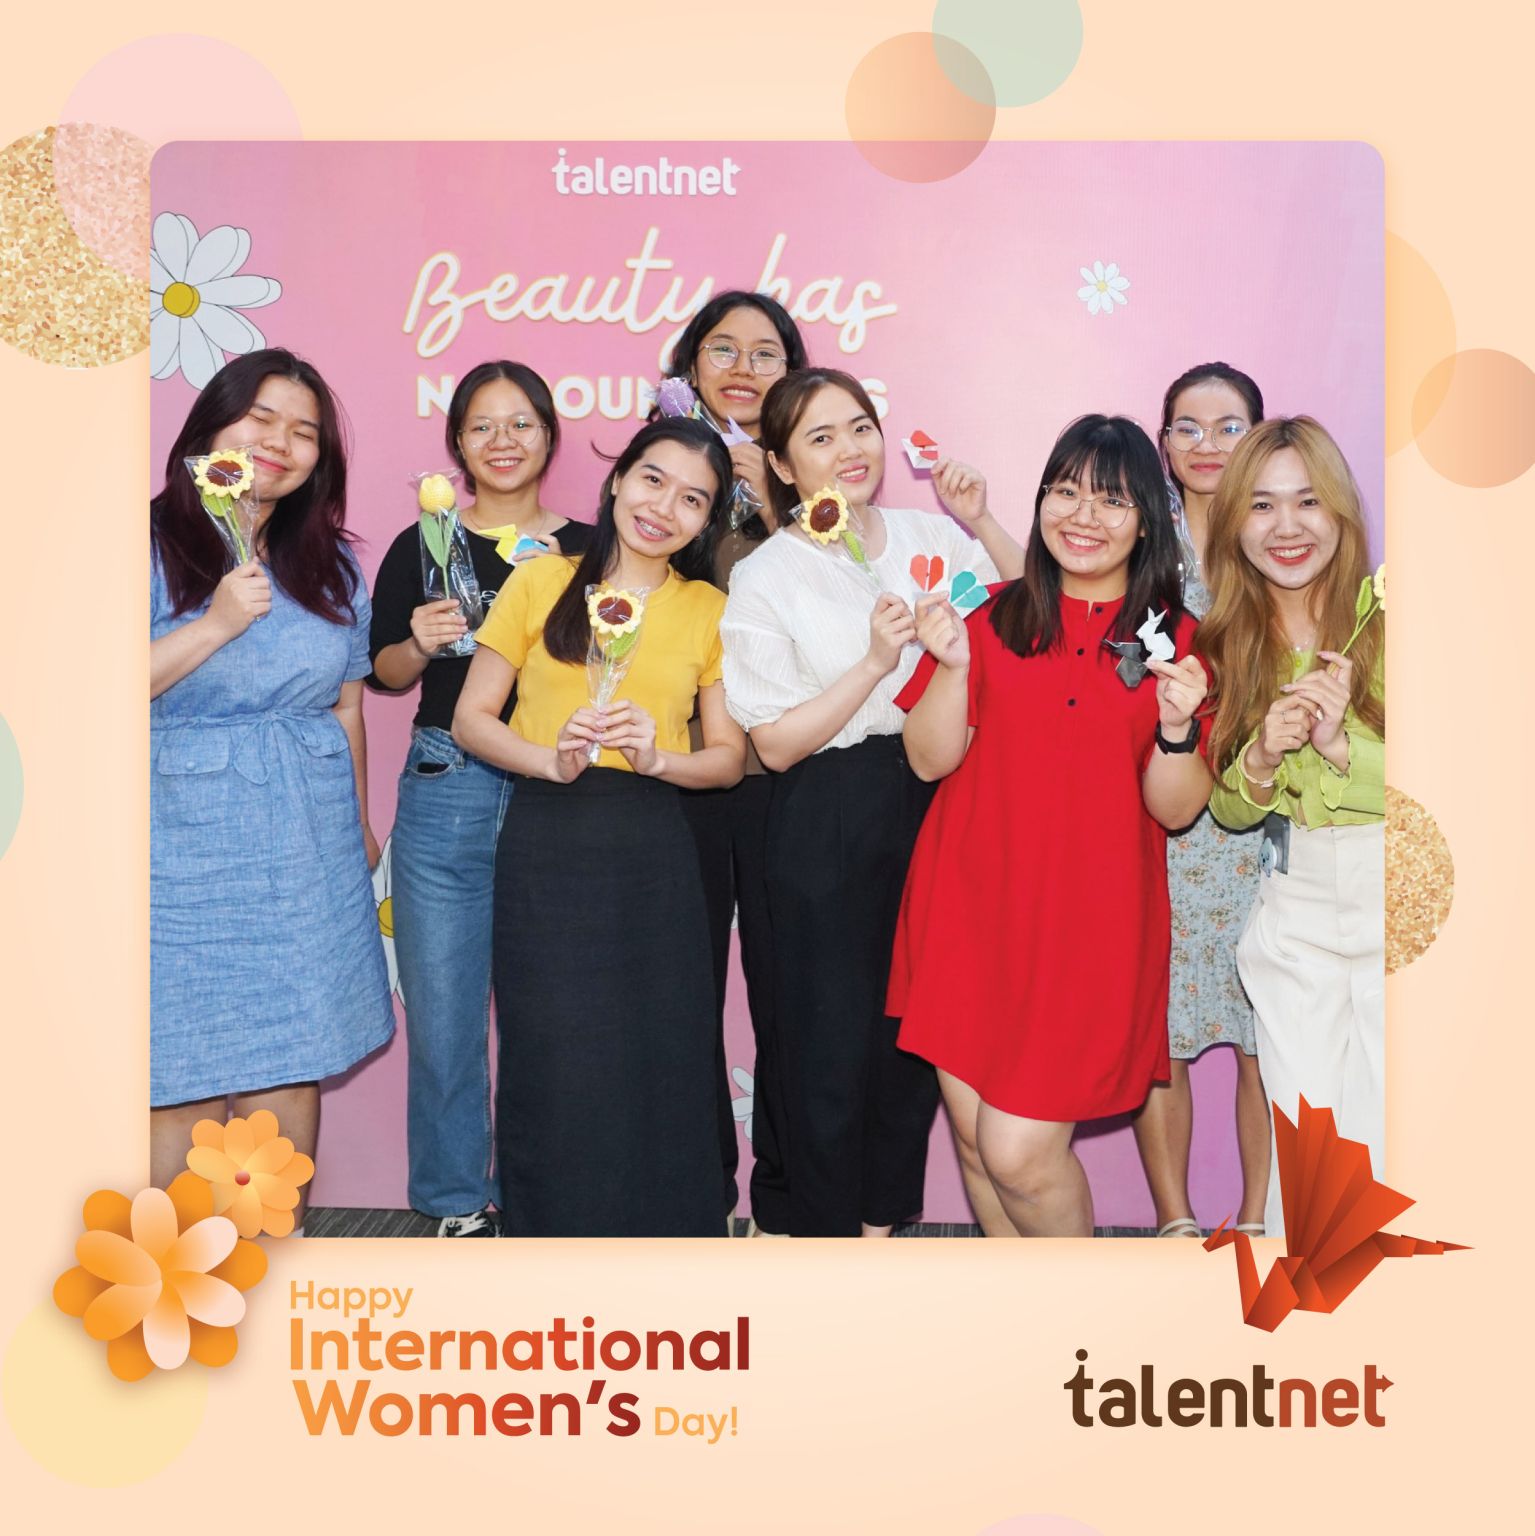 BEAUTY HAS NO BOUNDARIES

Talentnet believes that happiness means you appreciate uniqueness and be confident. Under the theme “Beauty Has No Boundaries”, a series of 